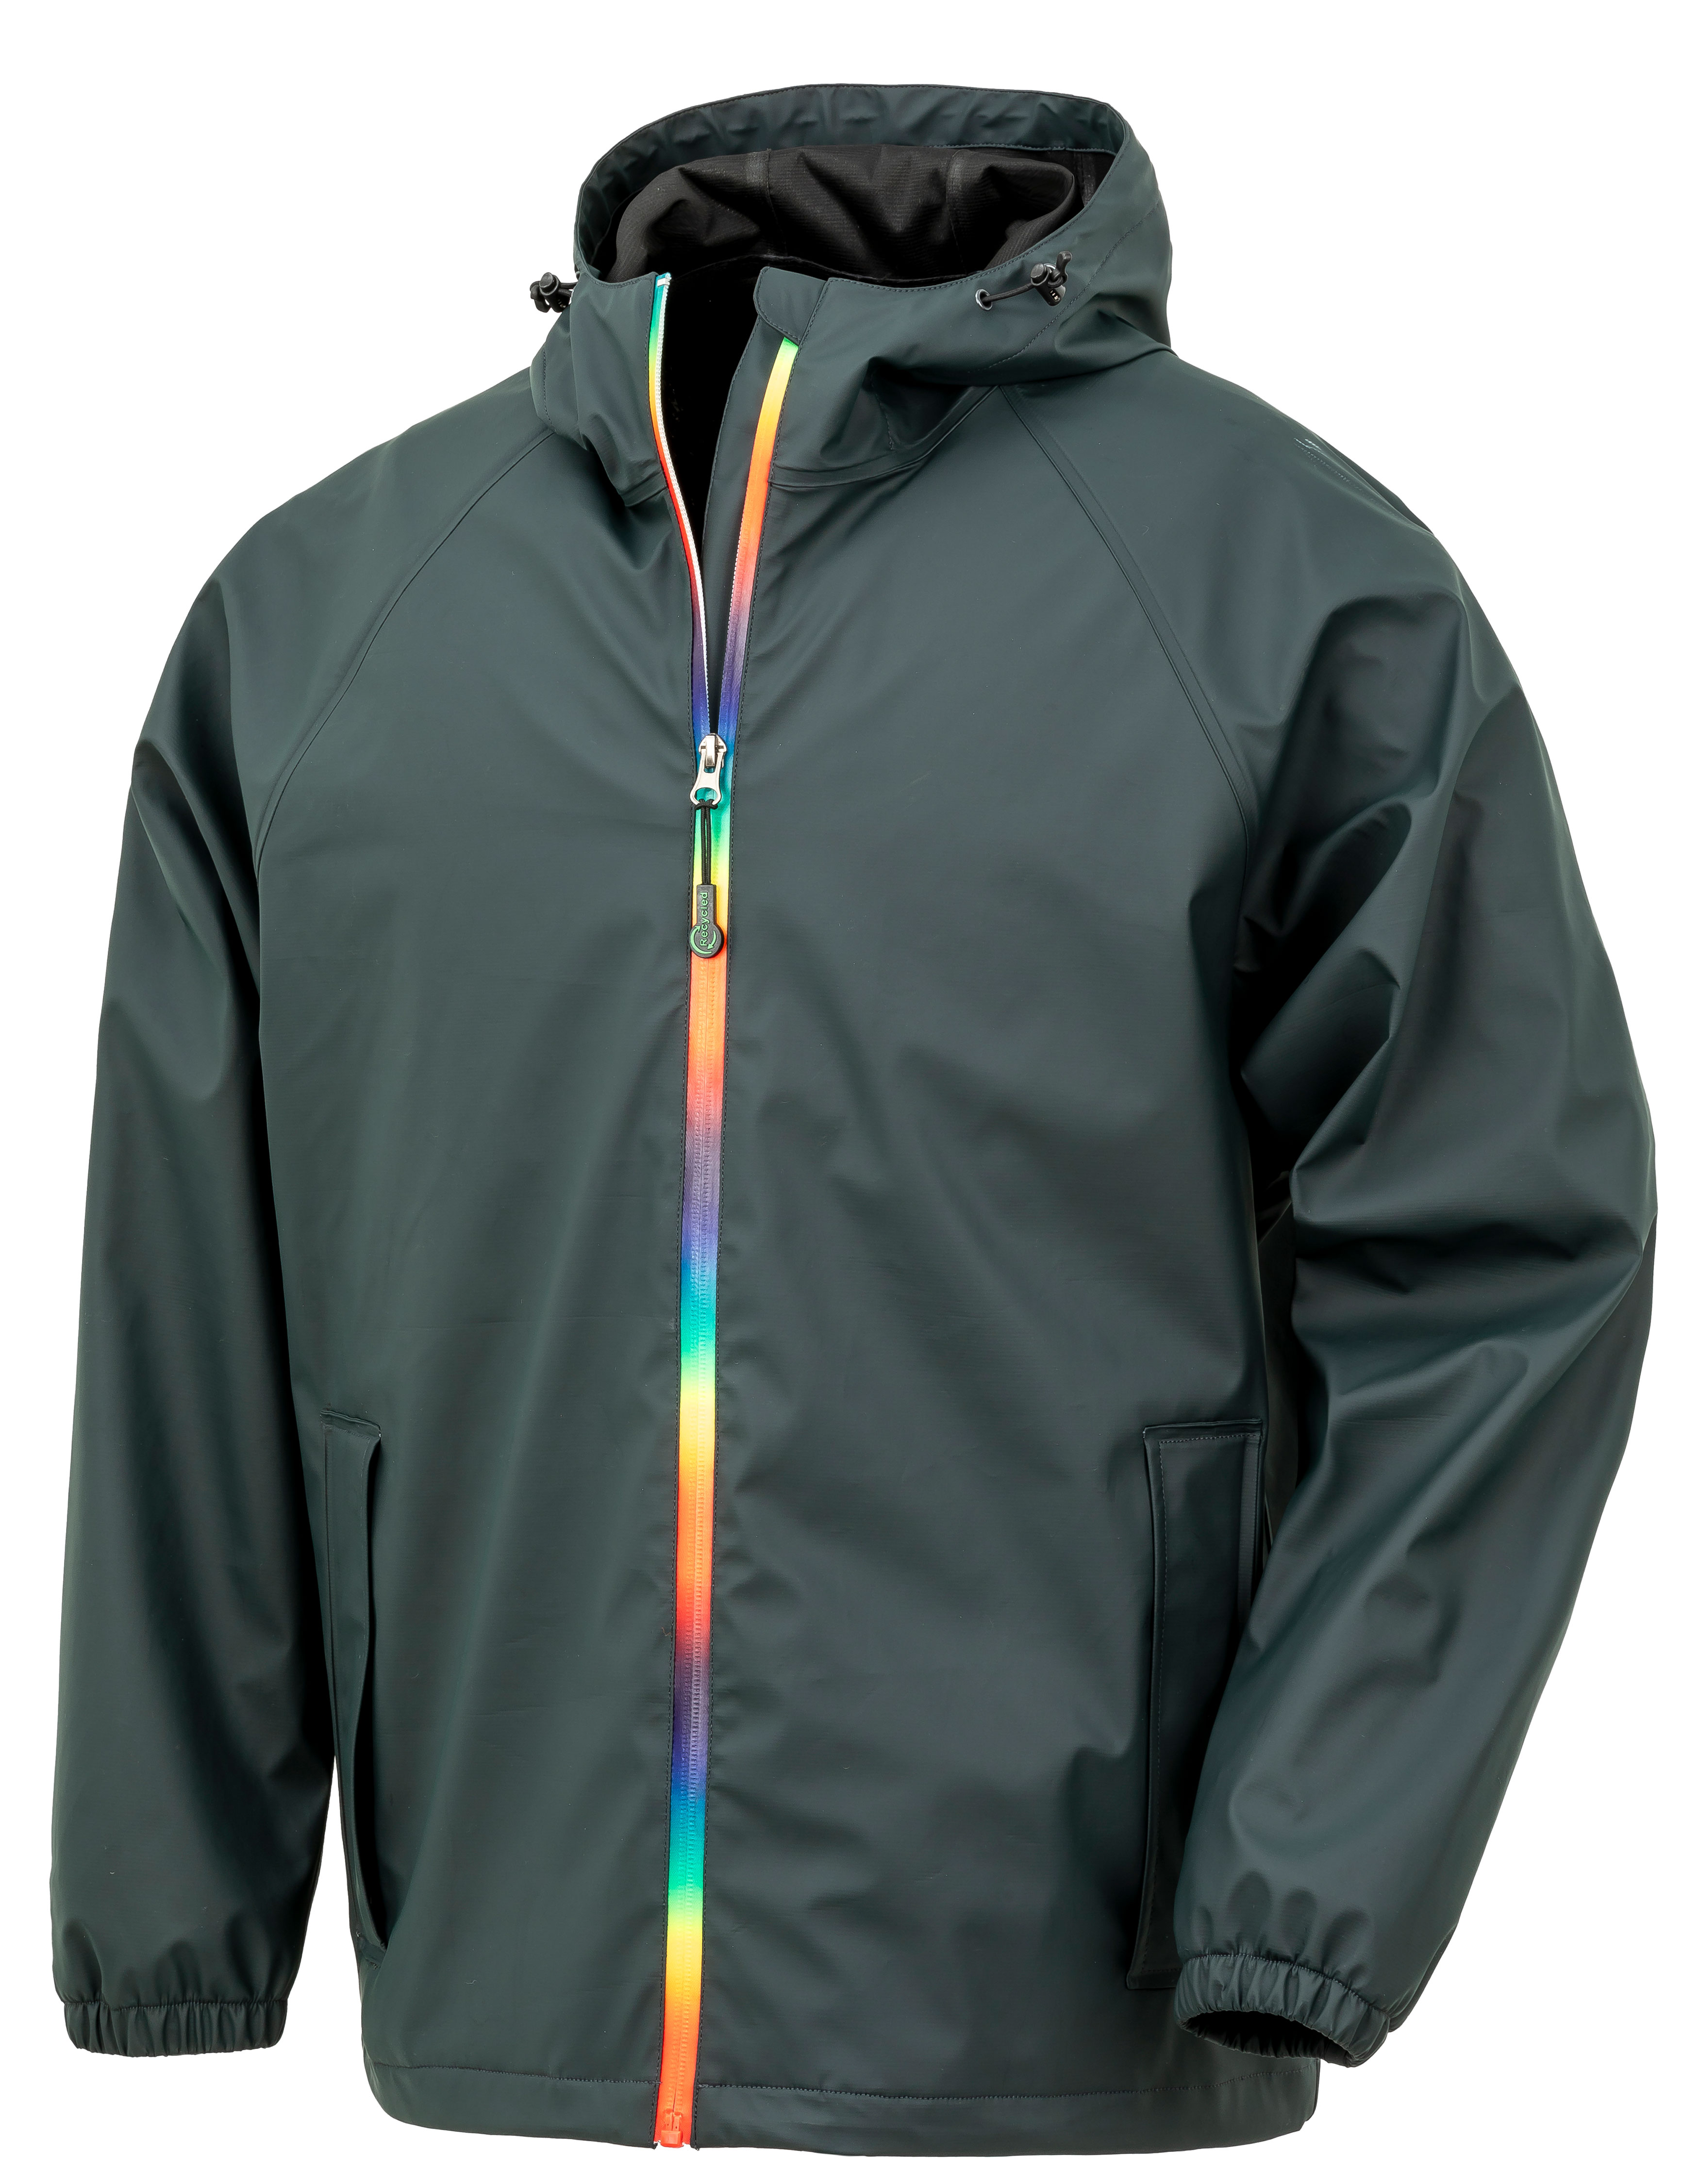 Result Genuine Recycled Prism PU Waterproof Jacket With Recycled Backing